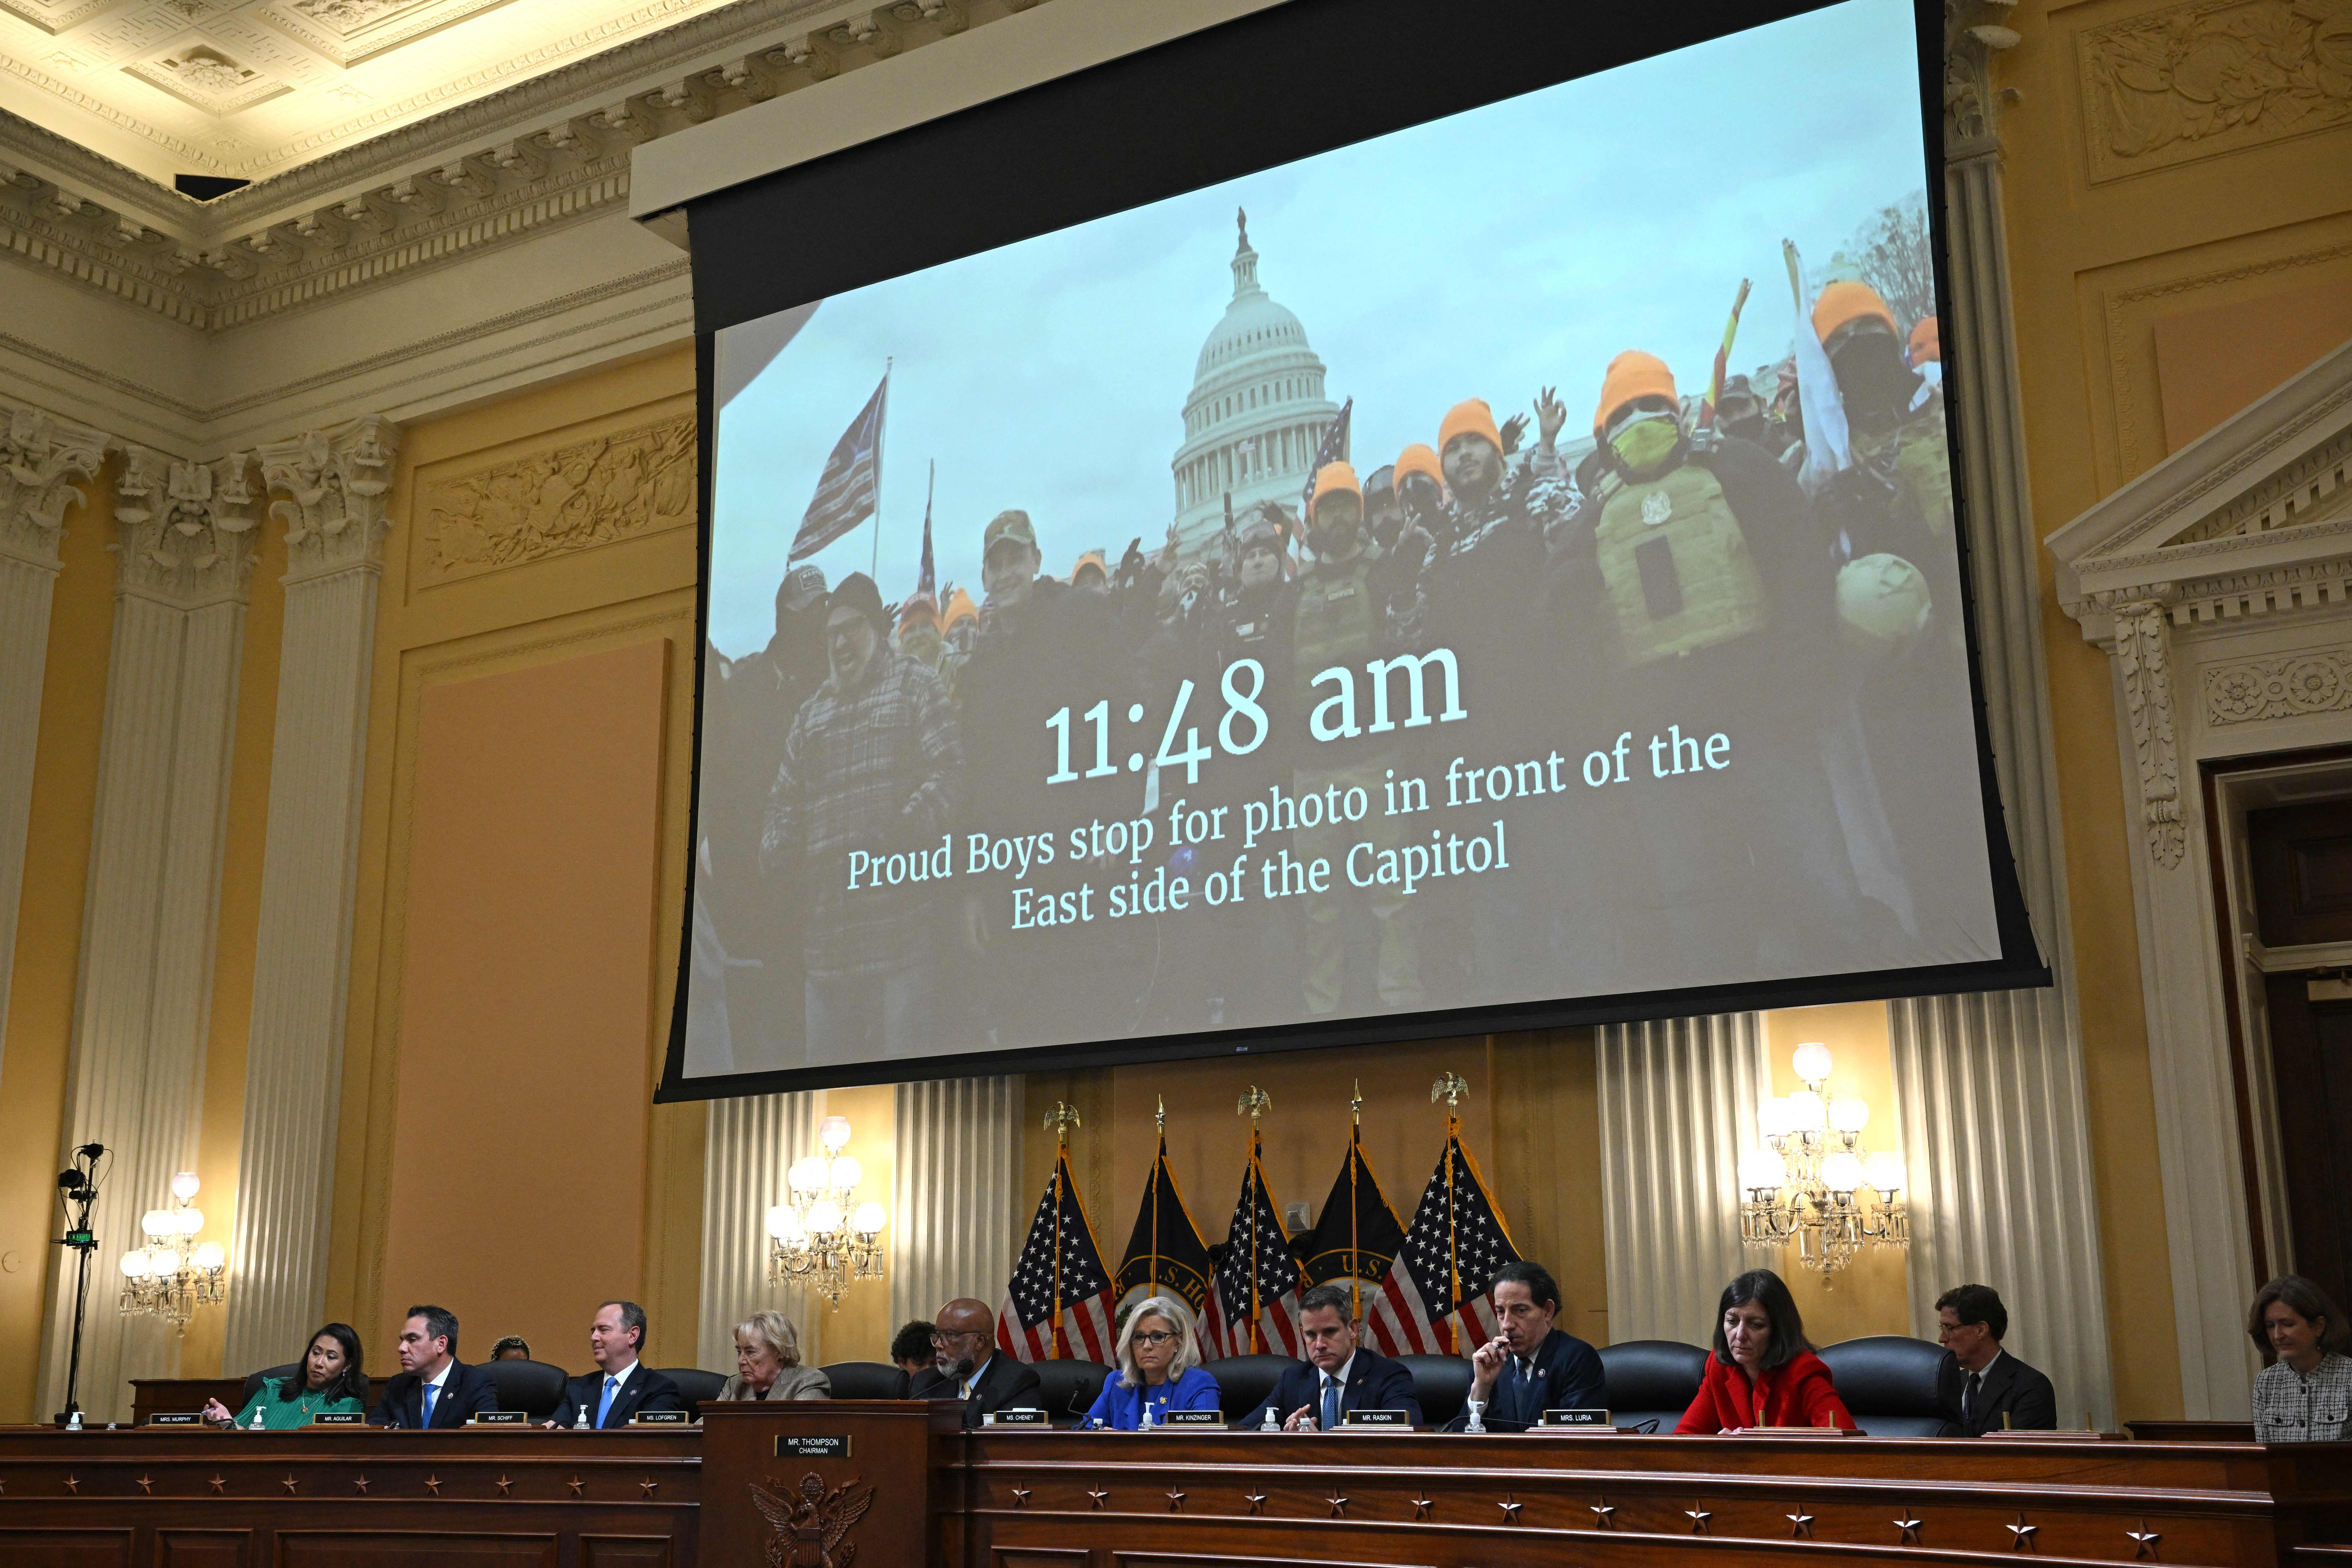 TOPSHOT - A video showing Proud Boys members appear on screen during a House Select Committee hearing to Investigate the January 6th Attack on the US Capitol, in the Cannon House Office Building on Capitol Hill in Washington, DC on June 9, 2022. (Photo by MANDEL NGAN / AFP) (Photo by MANDEL NGAN/AFP via Getty Images)